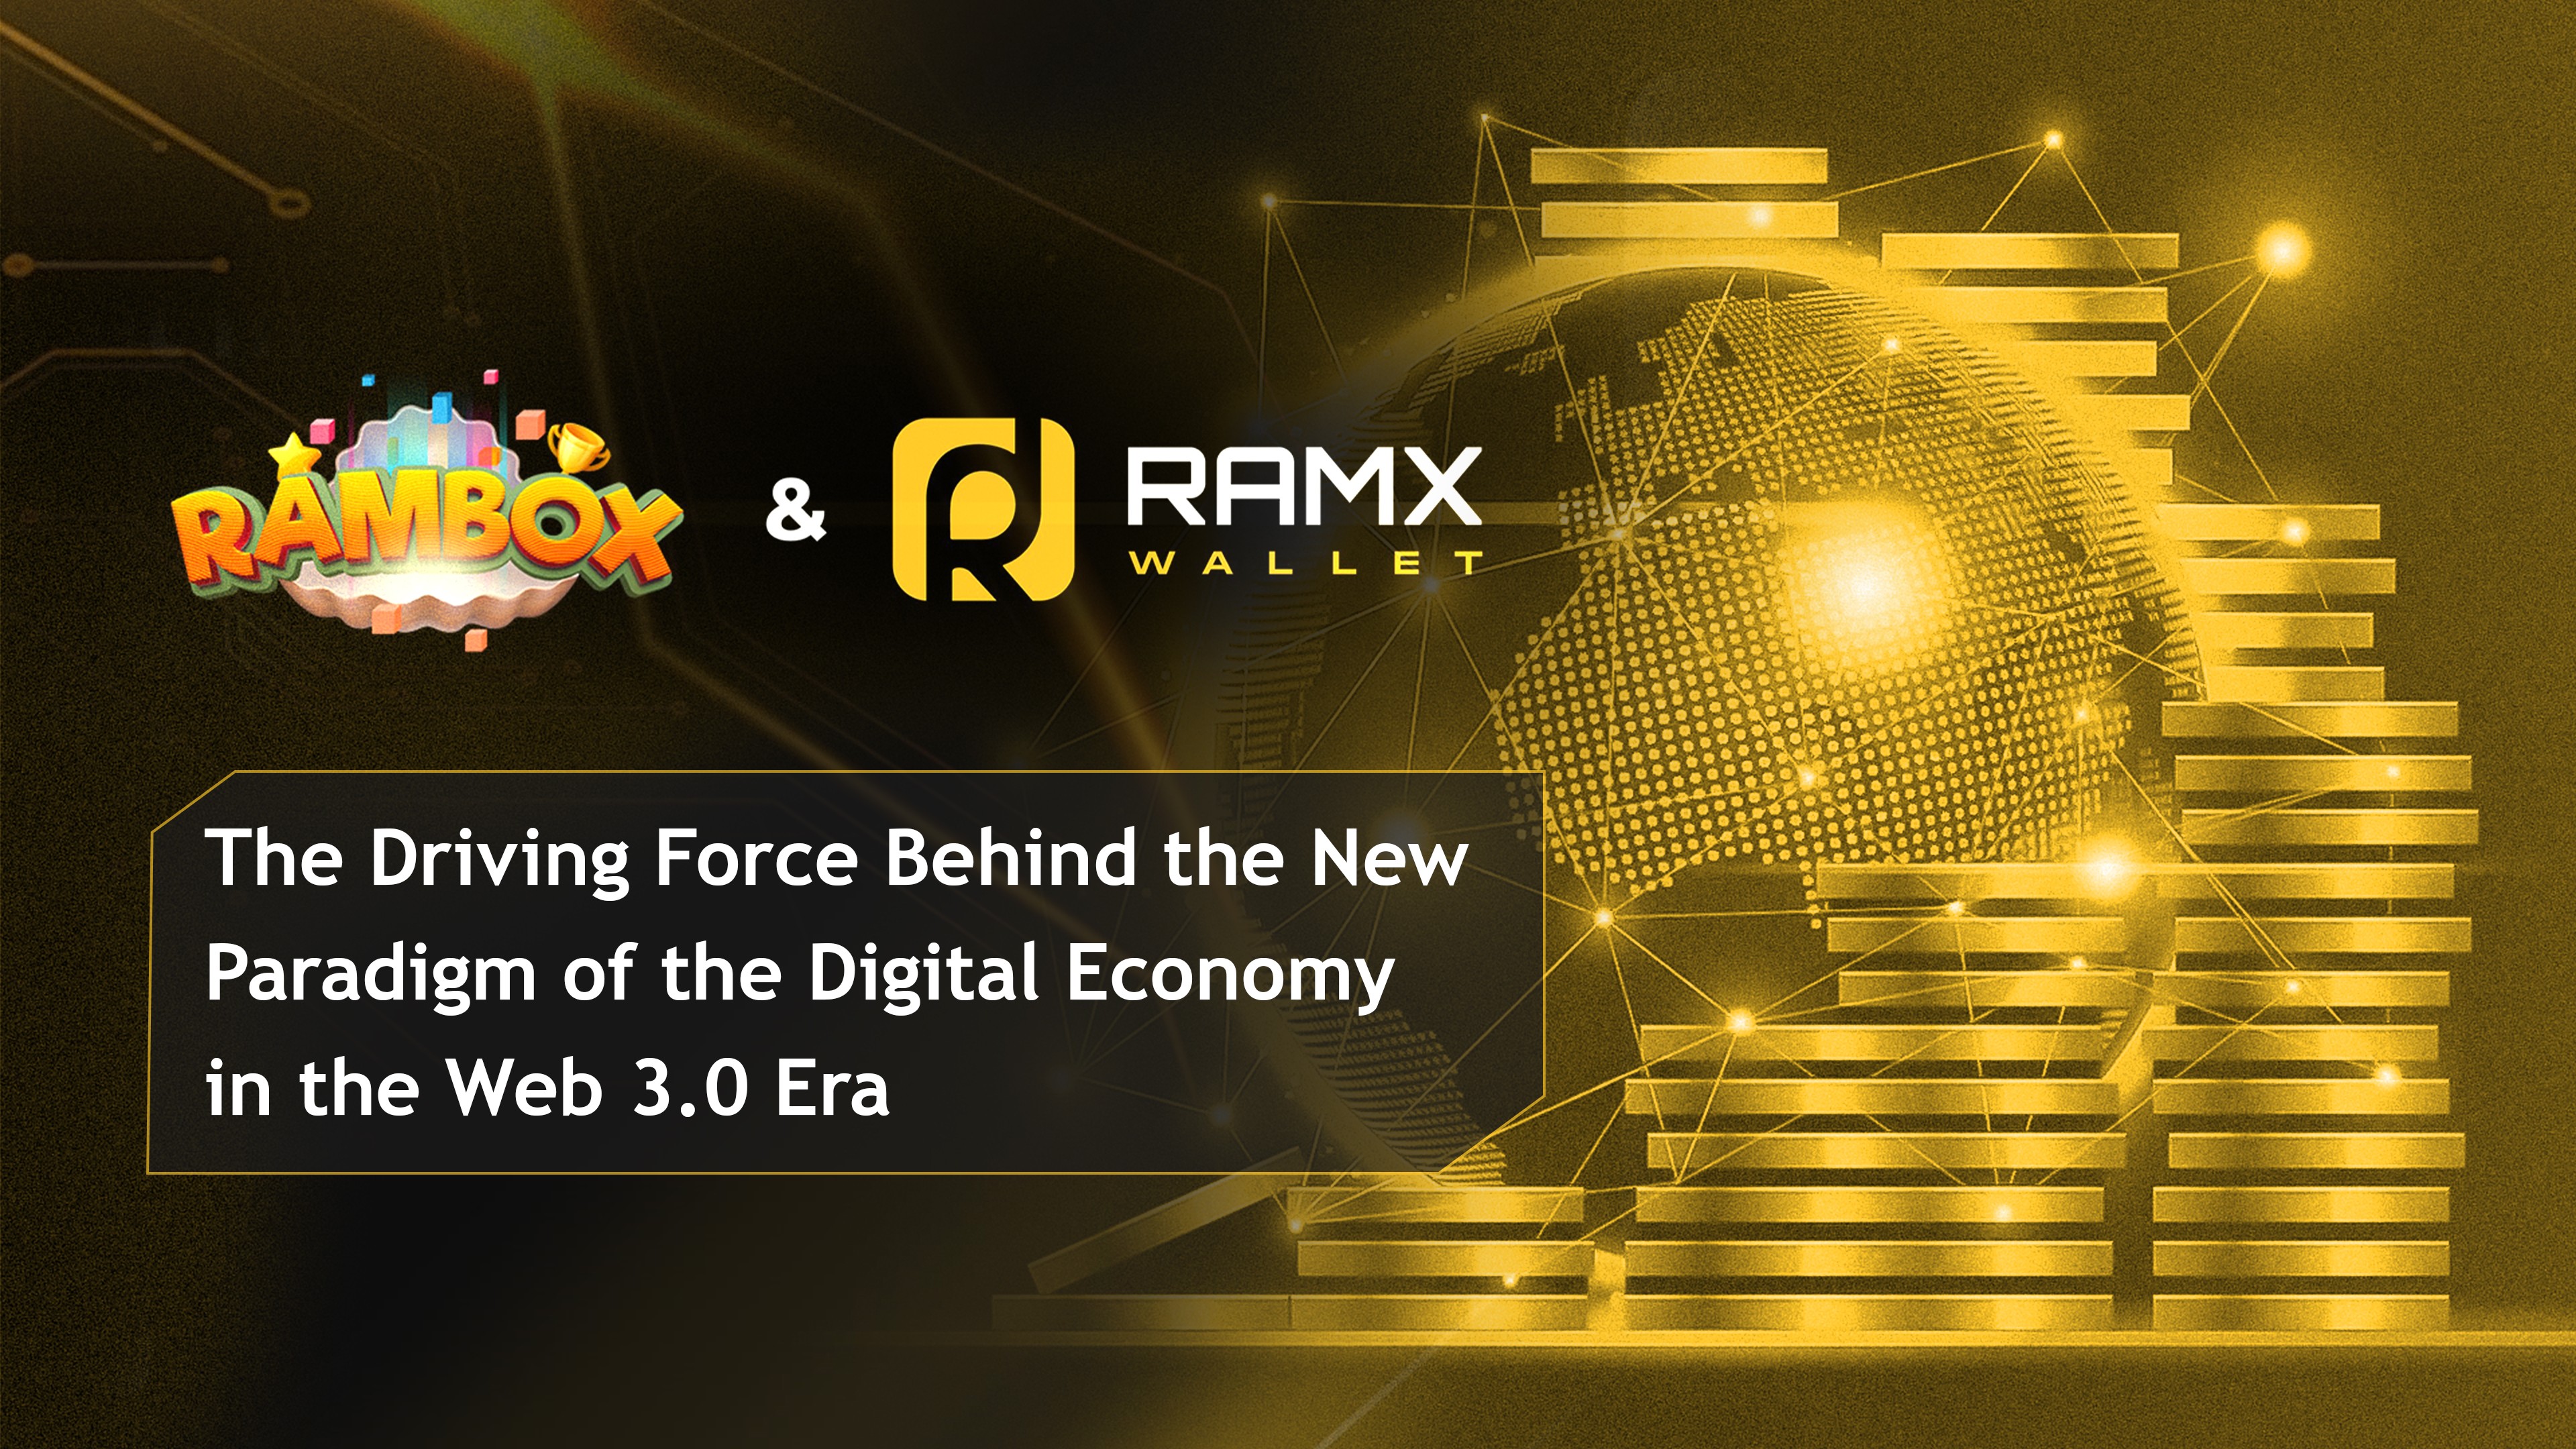 Rambox丨The Driving Force Behind the New Paradigm of the Digital Economy in the Web 3.0 Era